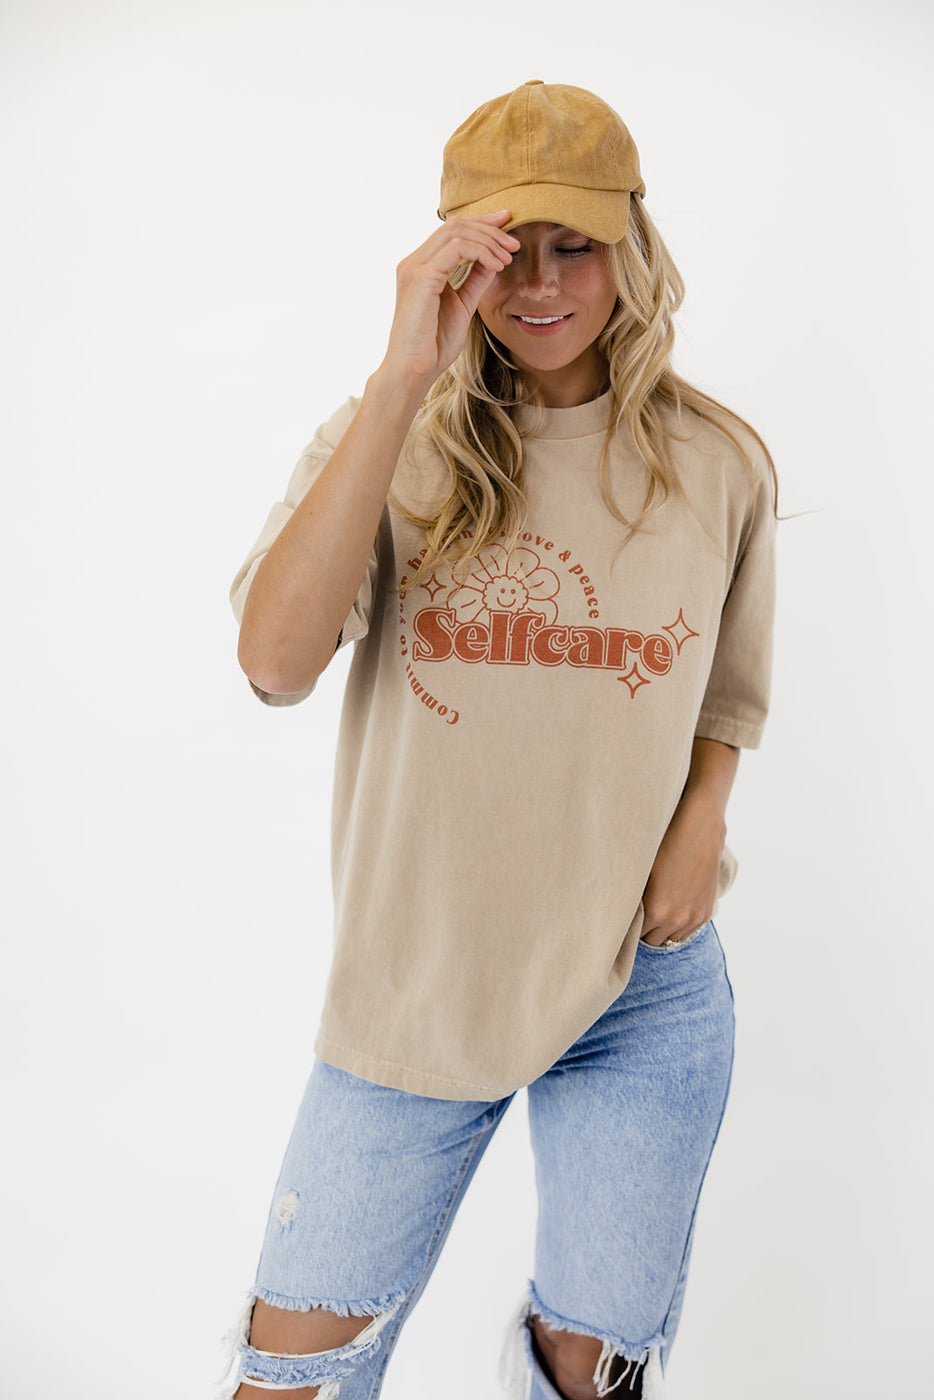 The Selfcare Graphic Tee